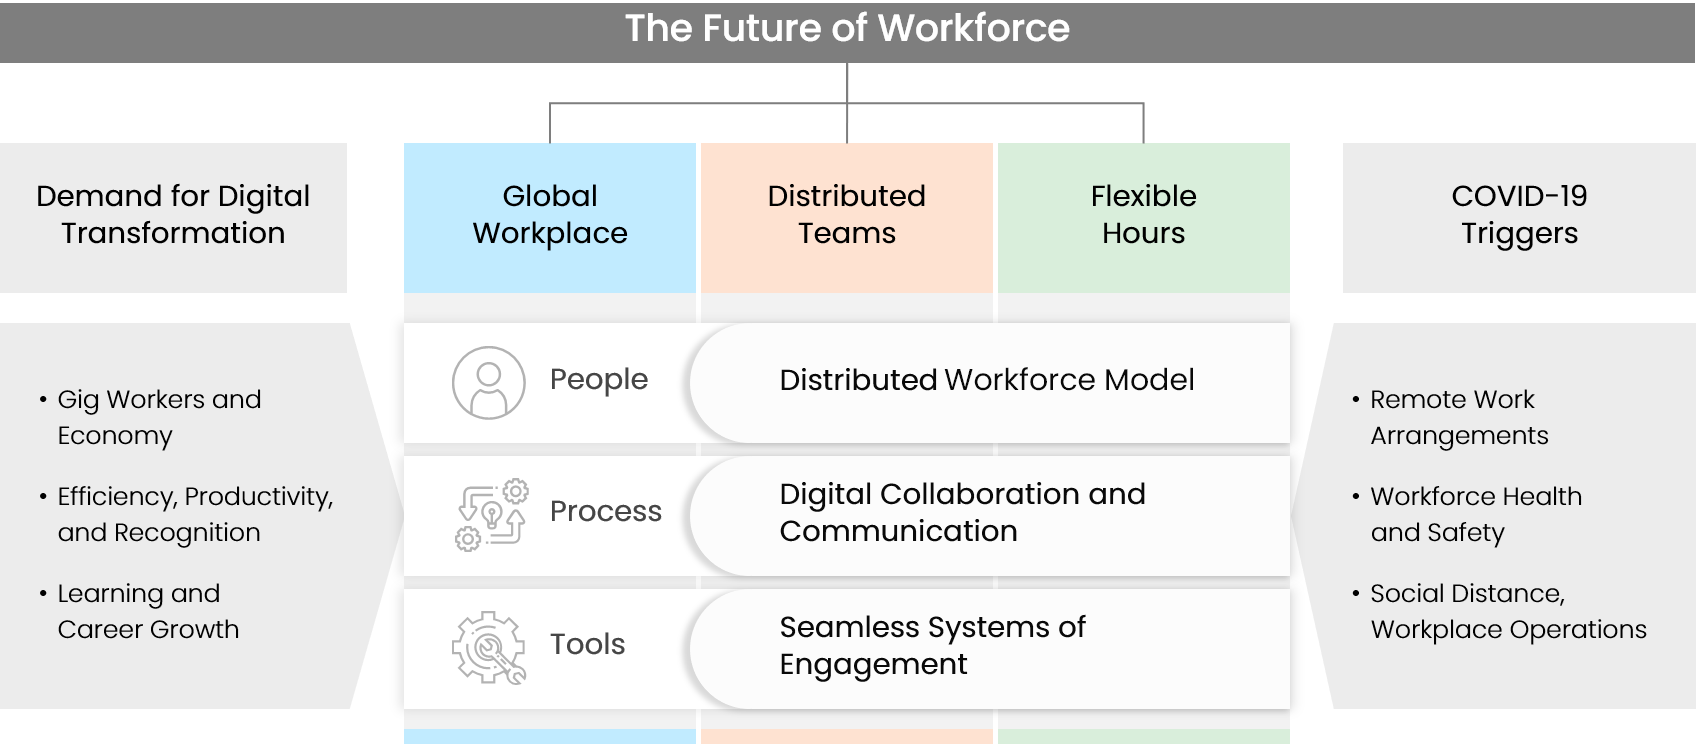 An image showing factors that make up the workforce of the future.